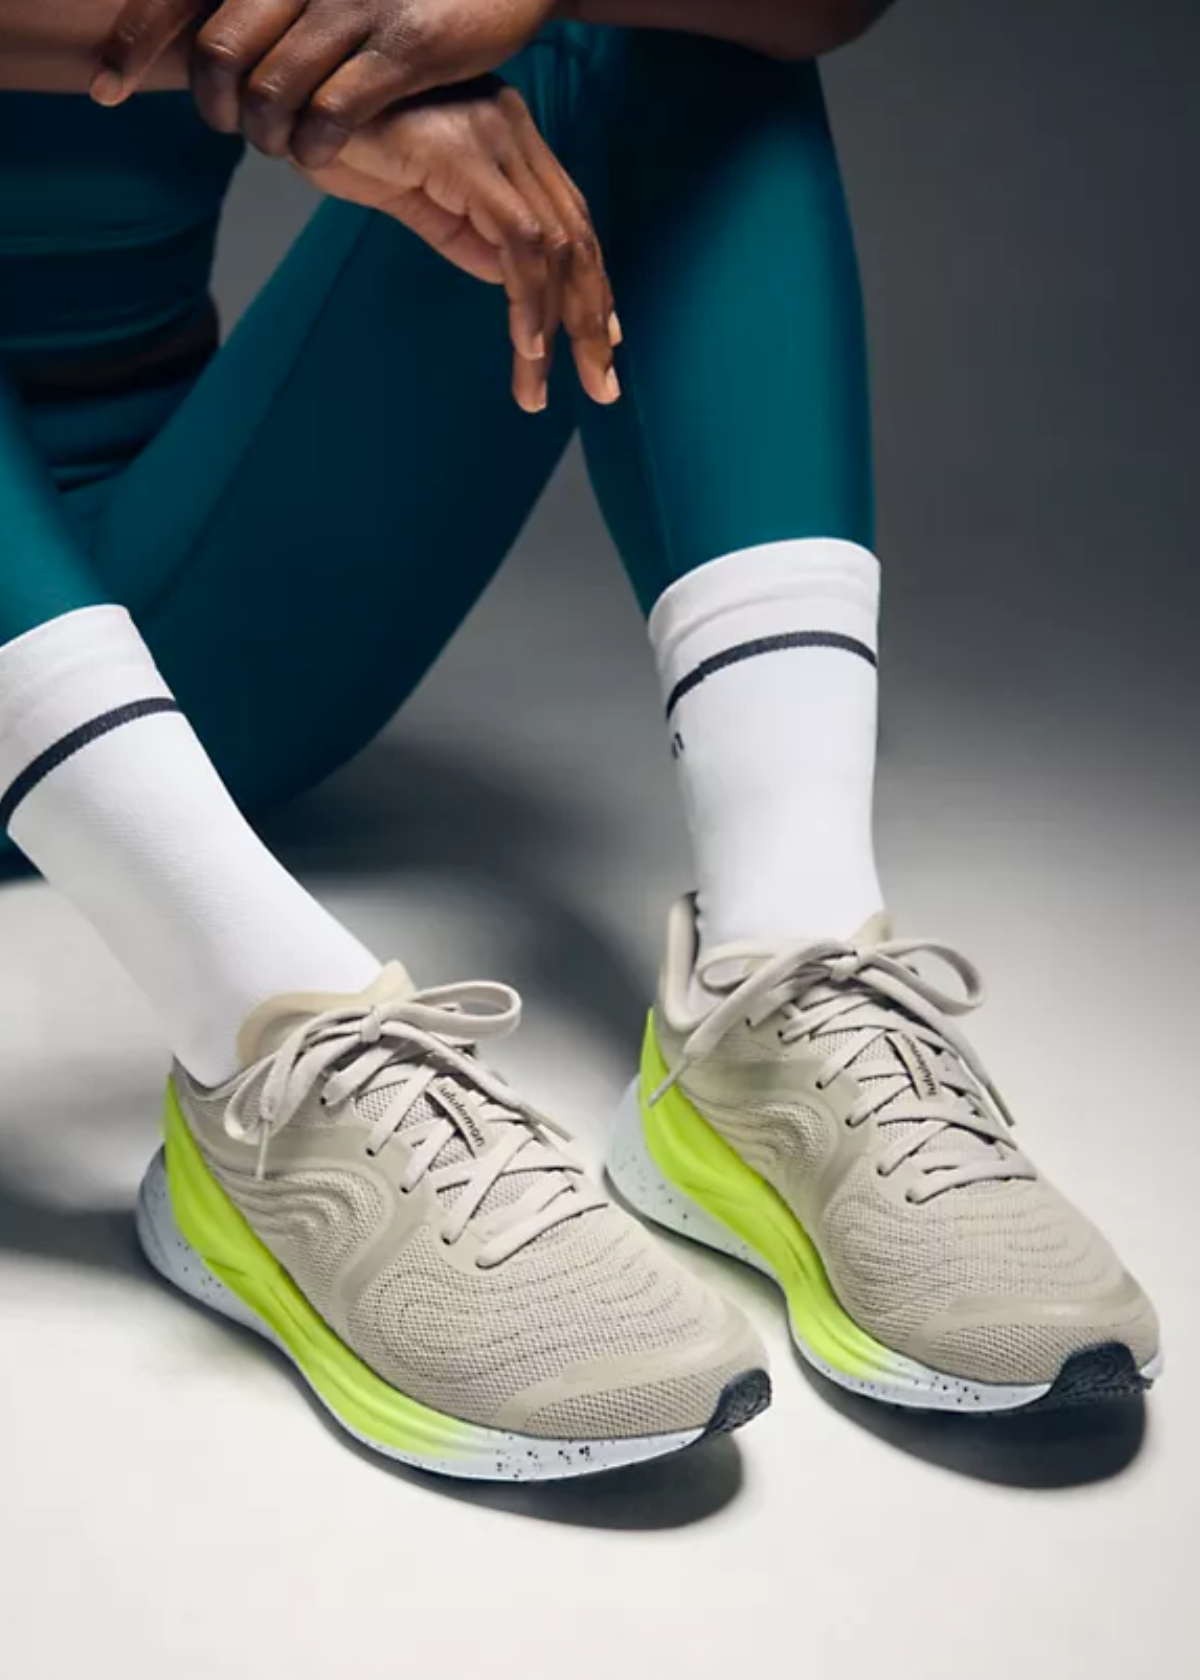 Lululemon Blissfeel 2 Shoe Review: Features, Pros and Cons